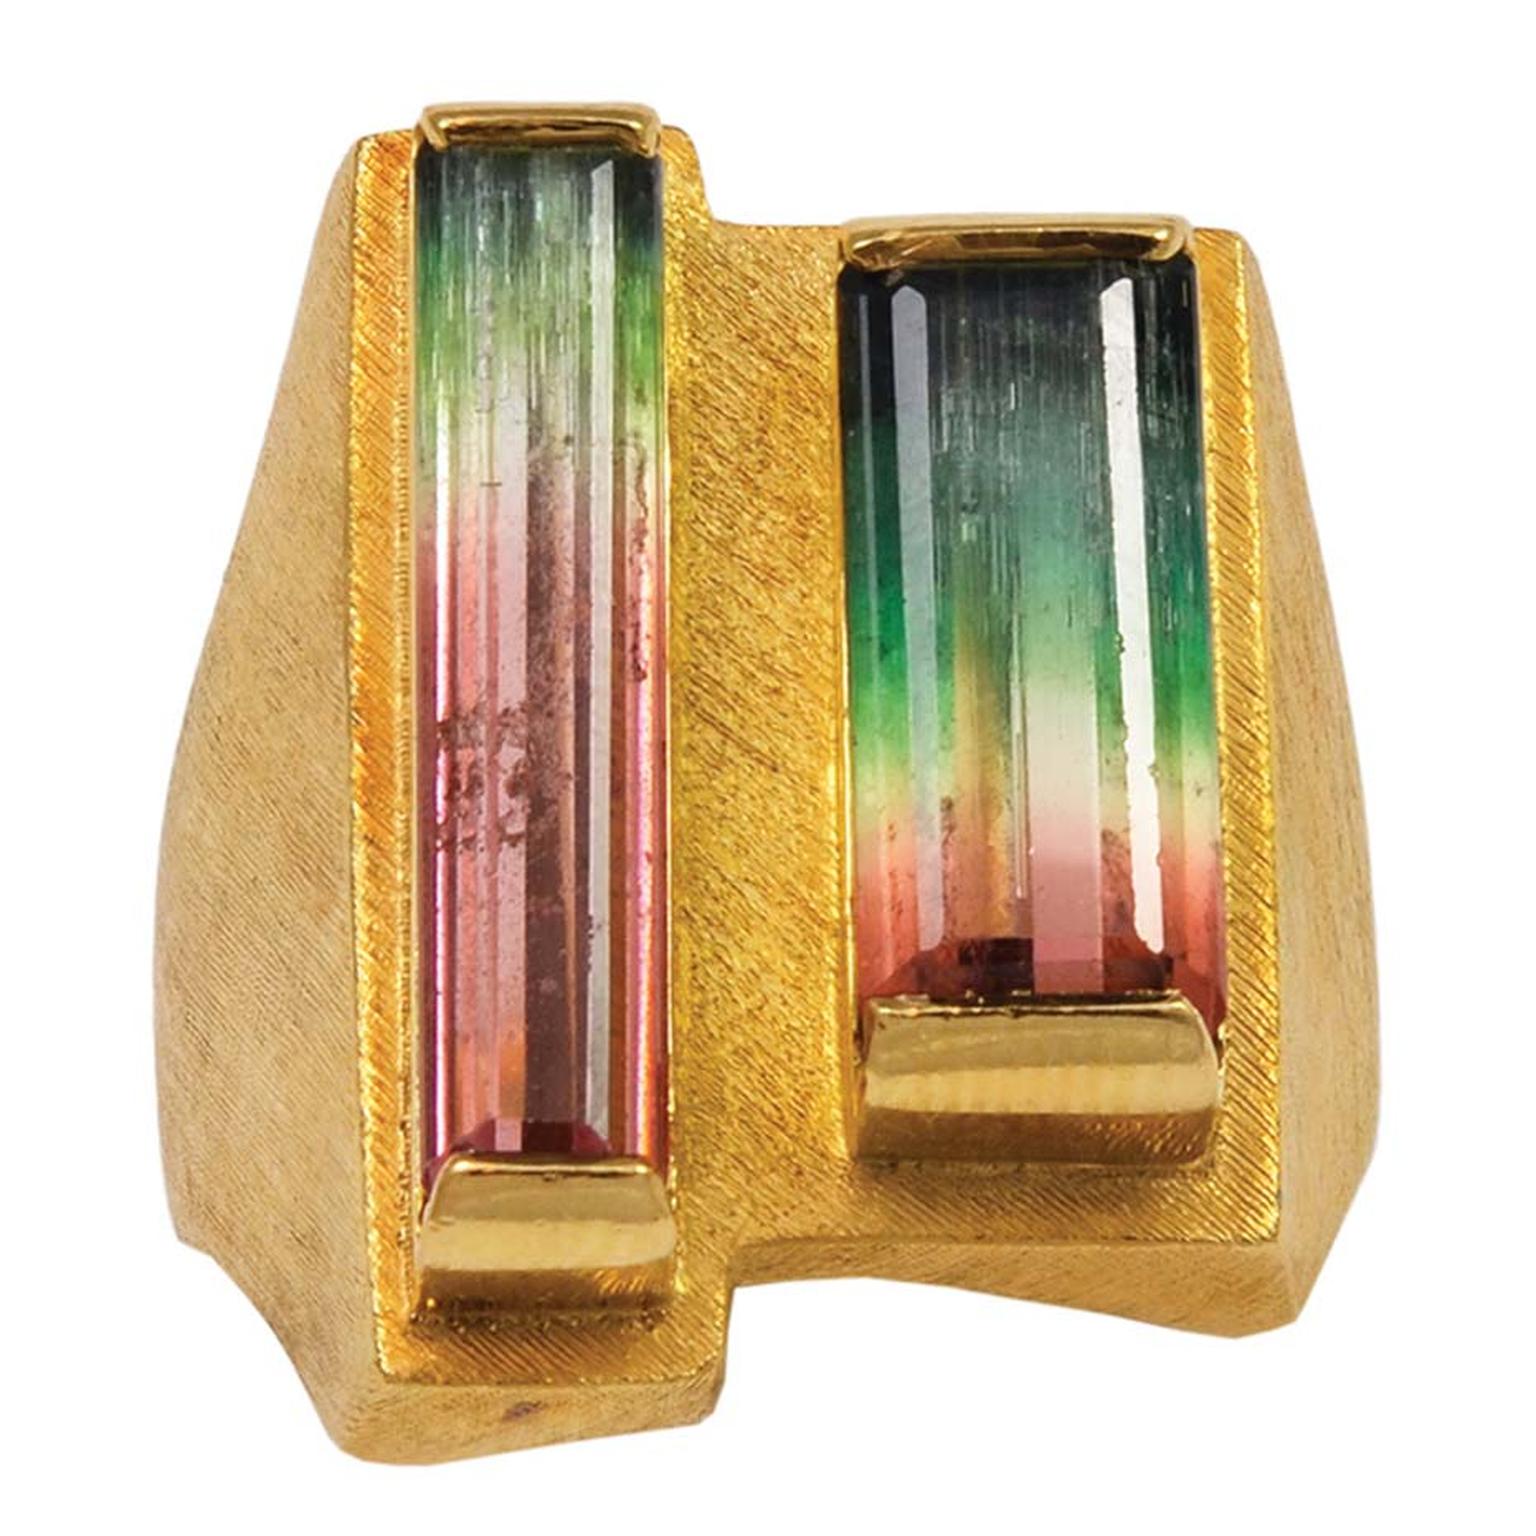 Bruno Guidi double step-cut watermelon tourmaline ring in brushed yellow gold. Available at 1sdibs.com.